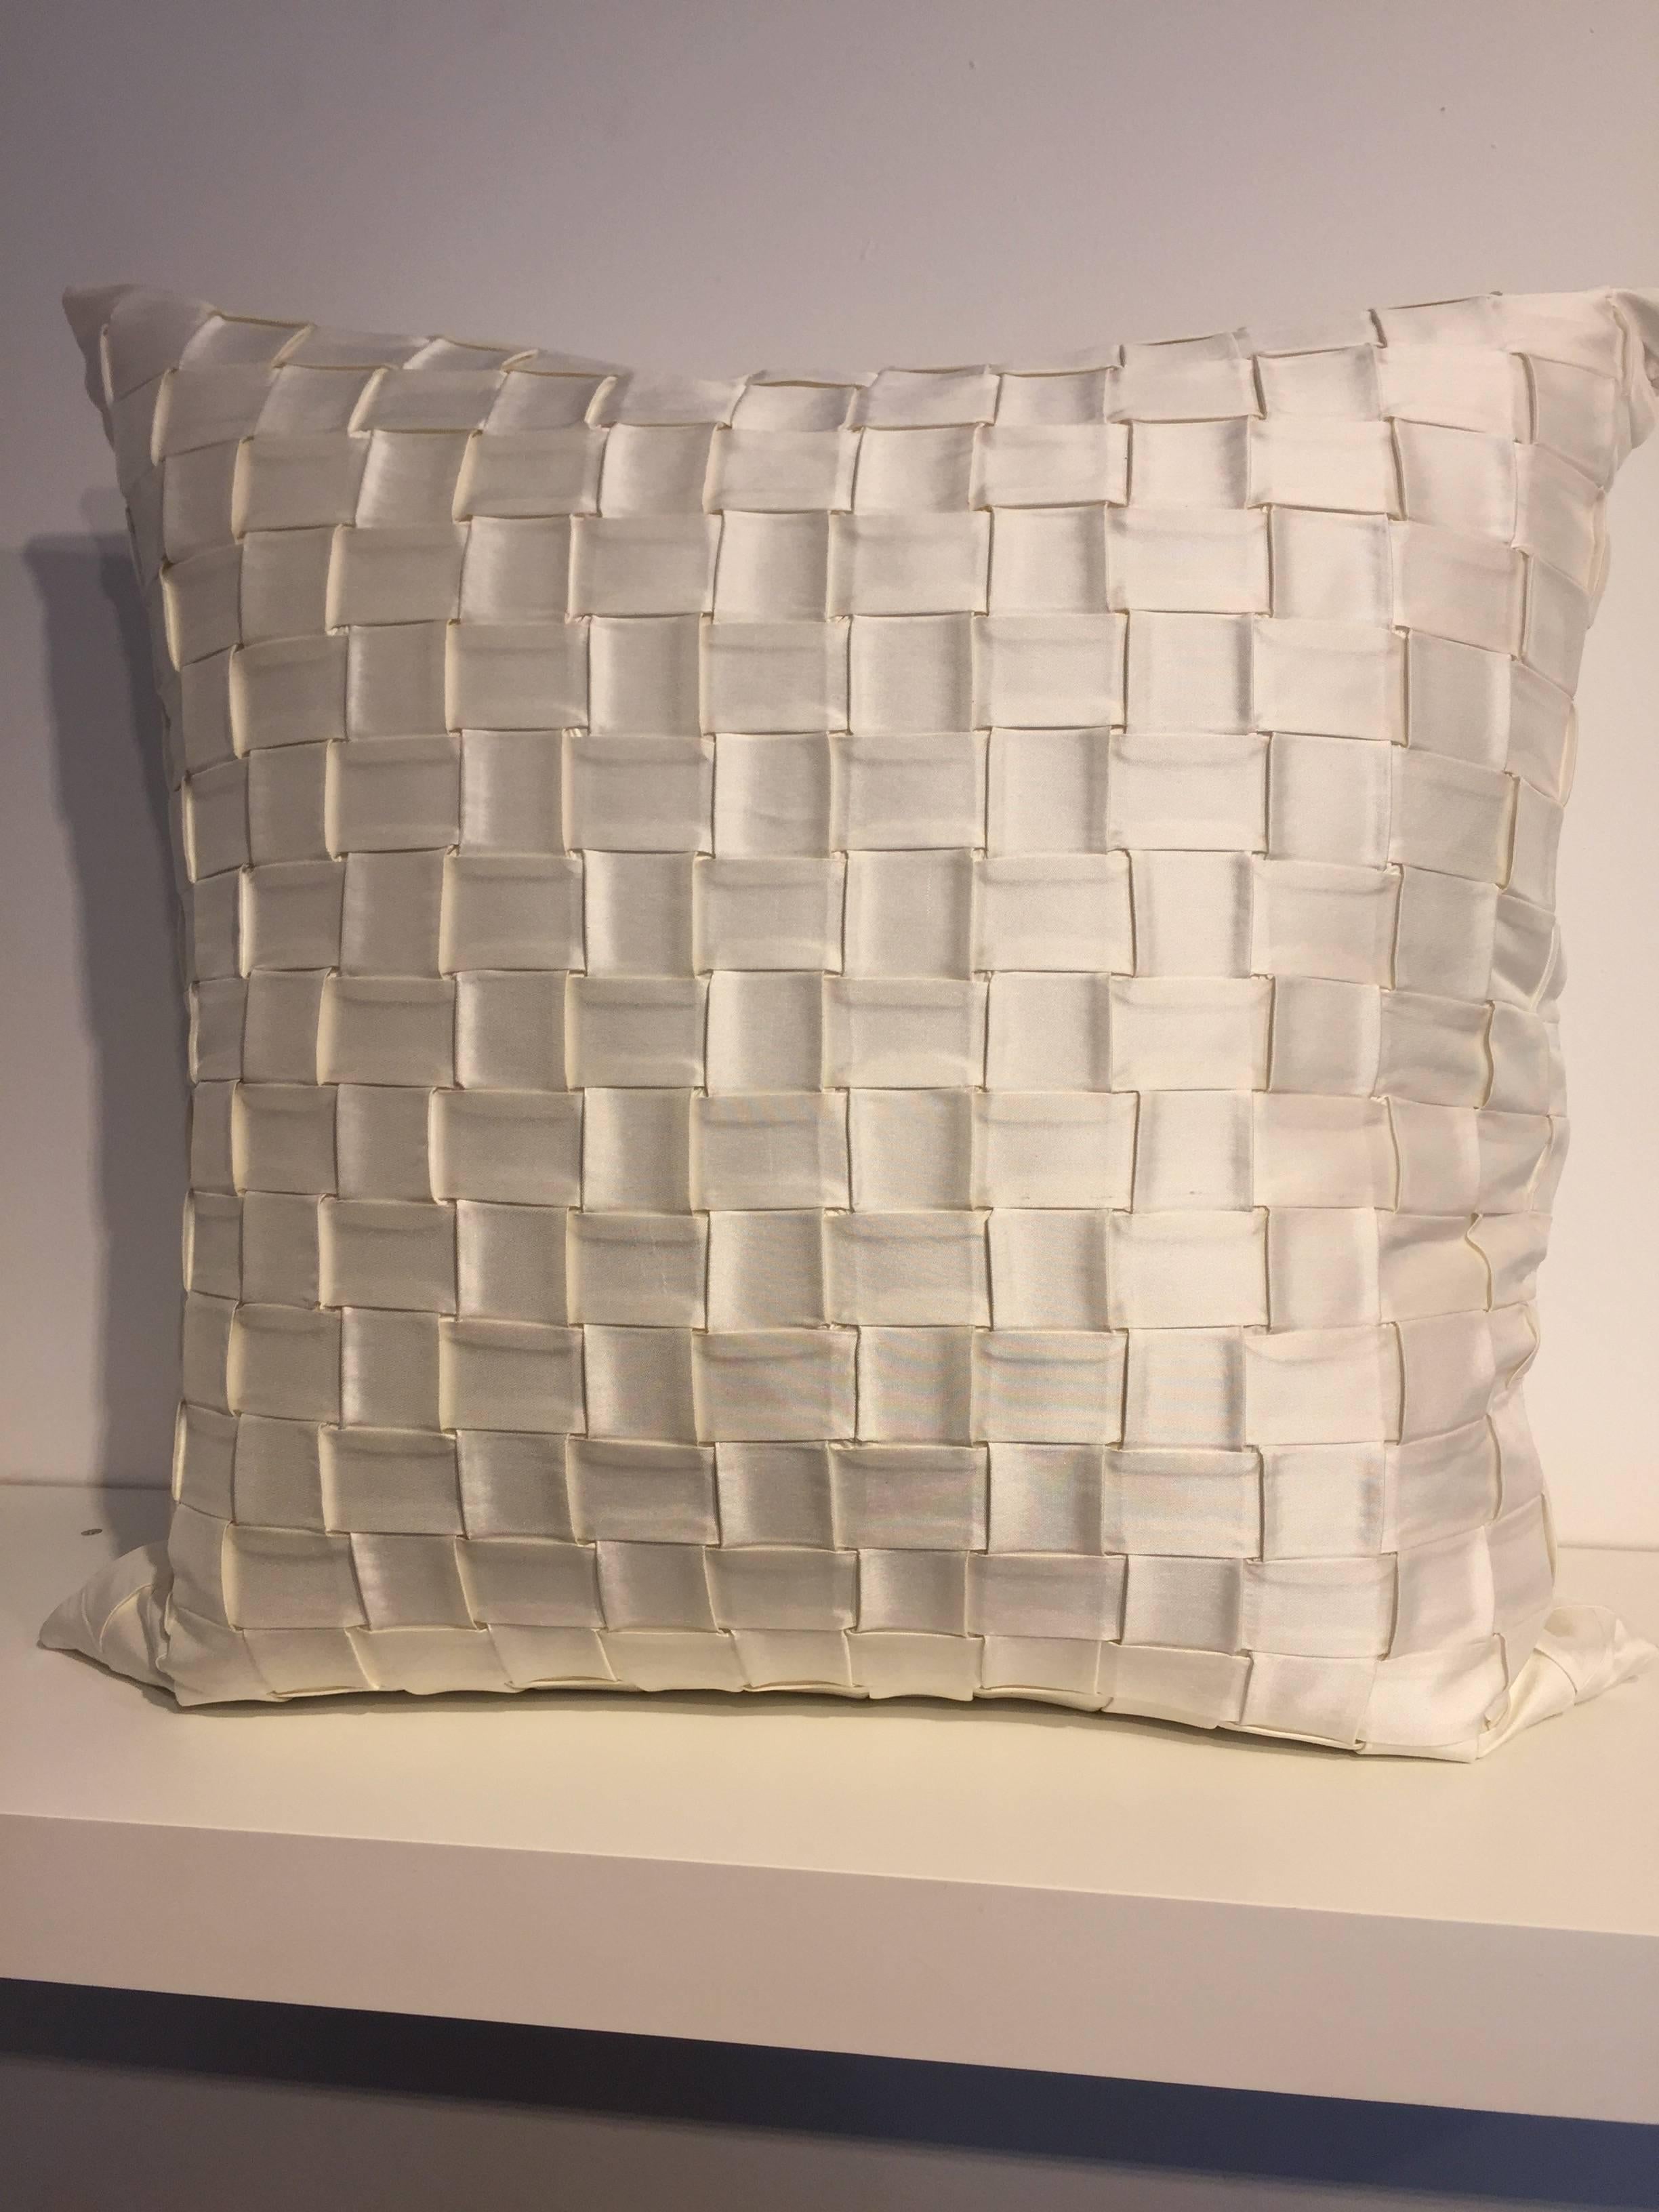 One pair silk cushions with embossed front panel in steam pleated, basket weave pattern, back panel plain silk, hand woven silk Bruno triplet taffeta #63 col. Oyster, size 55 x 55cm,
Cushion cover with lining and concealed zipper in the bottom